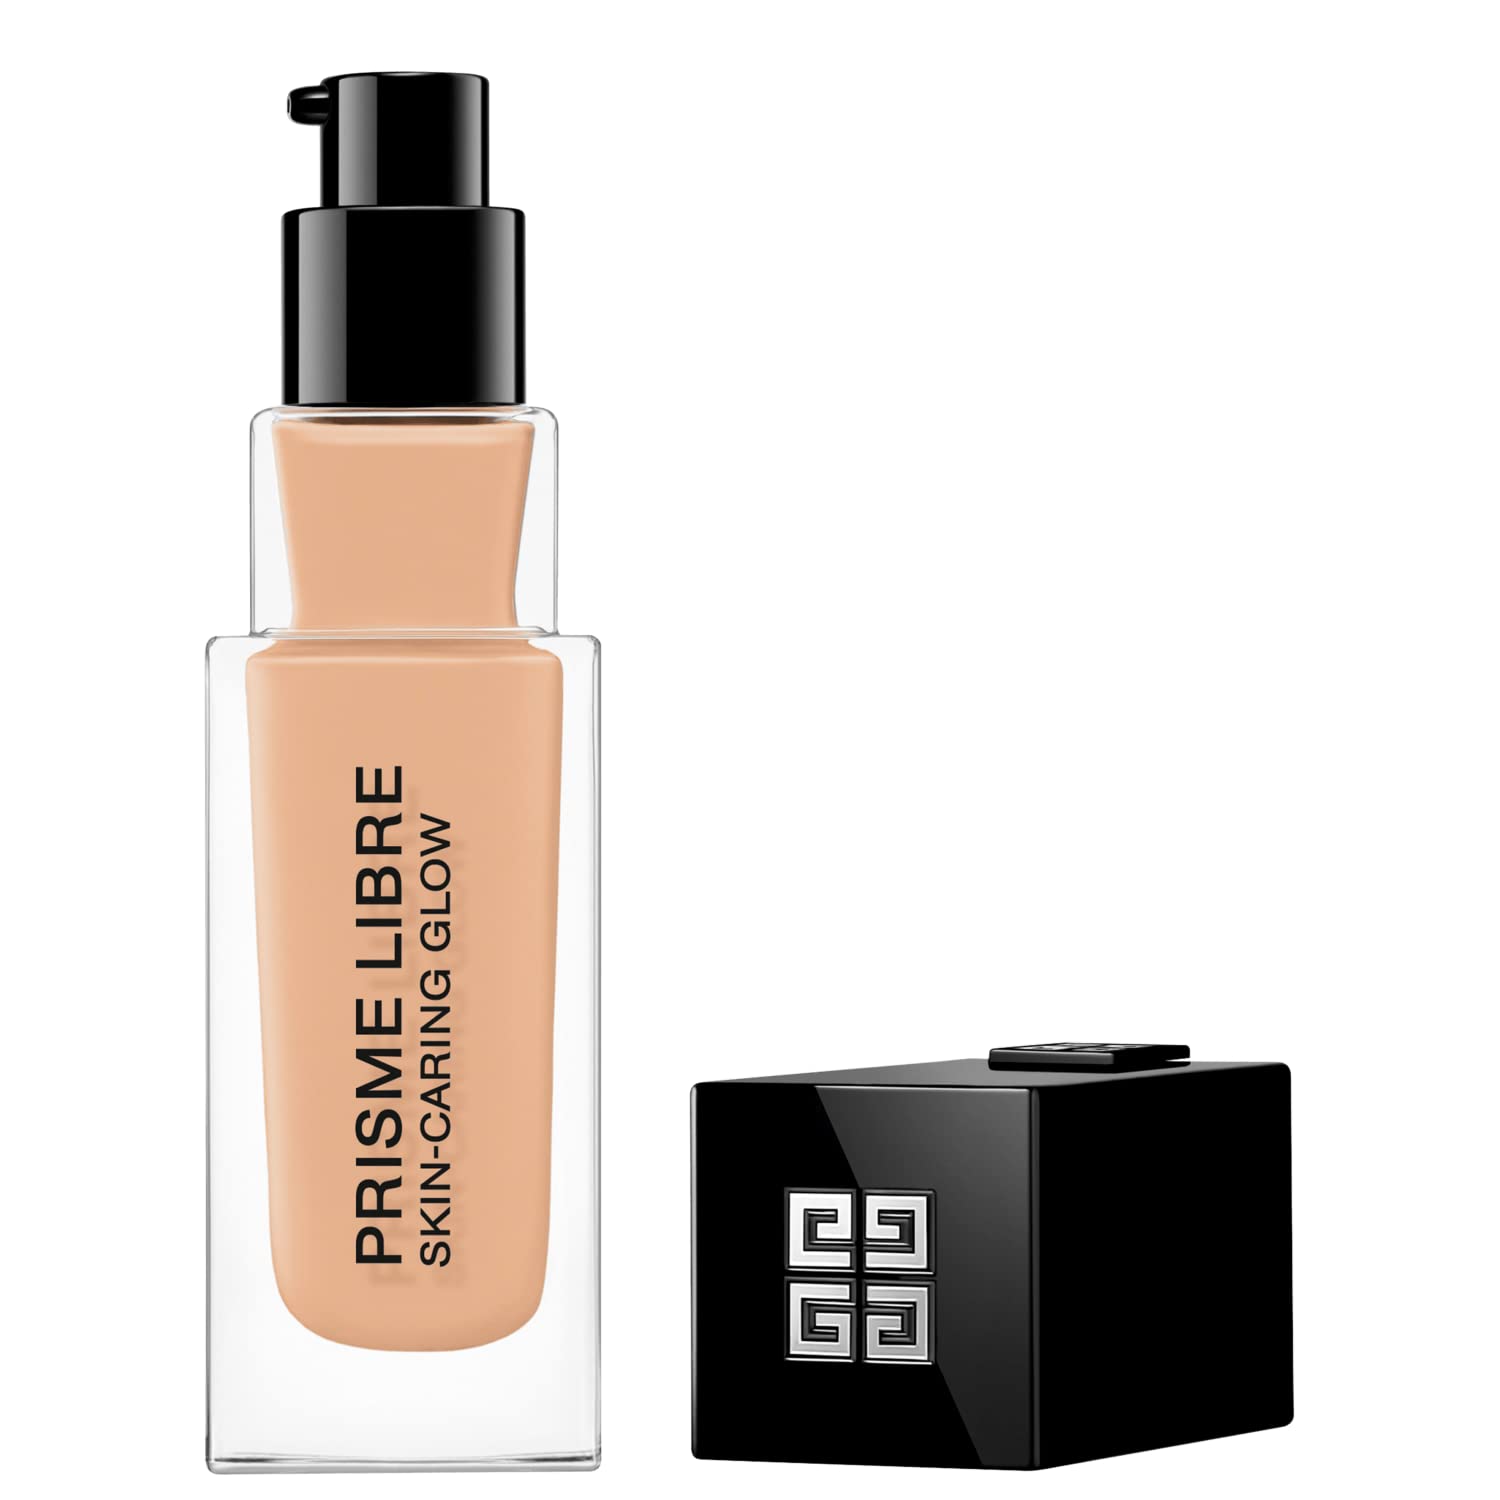 Prisme Libre Skin-Caring Glow Foundation - 2-N120 by Givenchy for Women - 1 oz Foundation